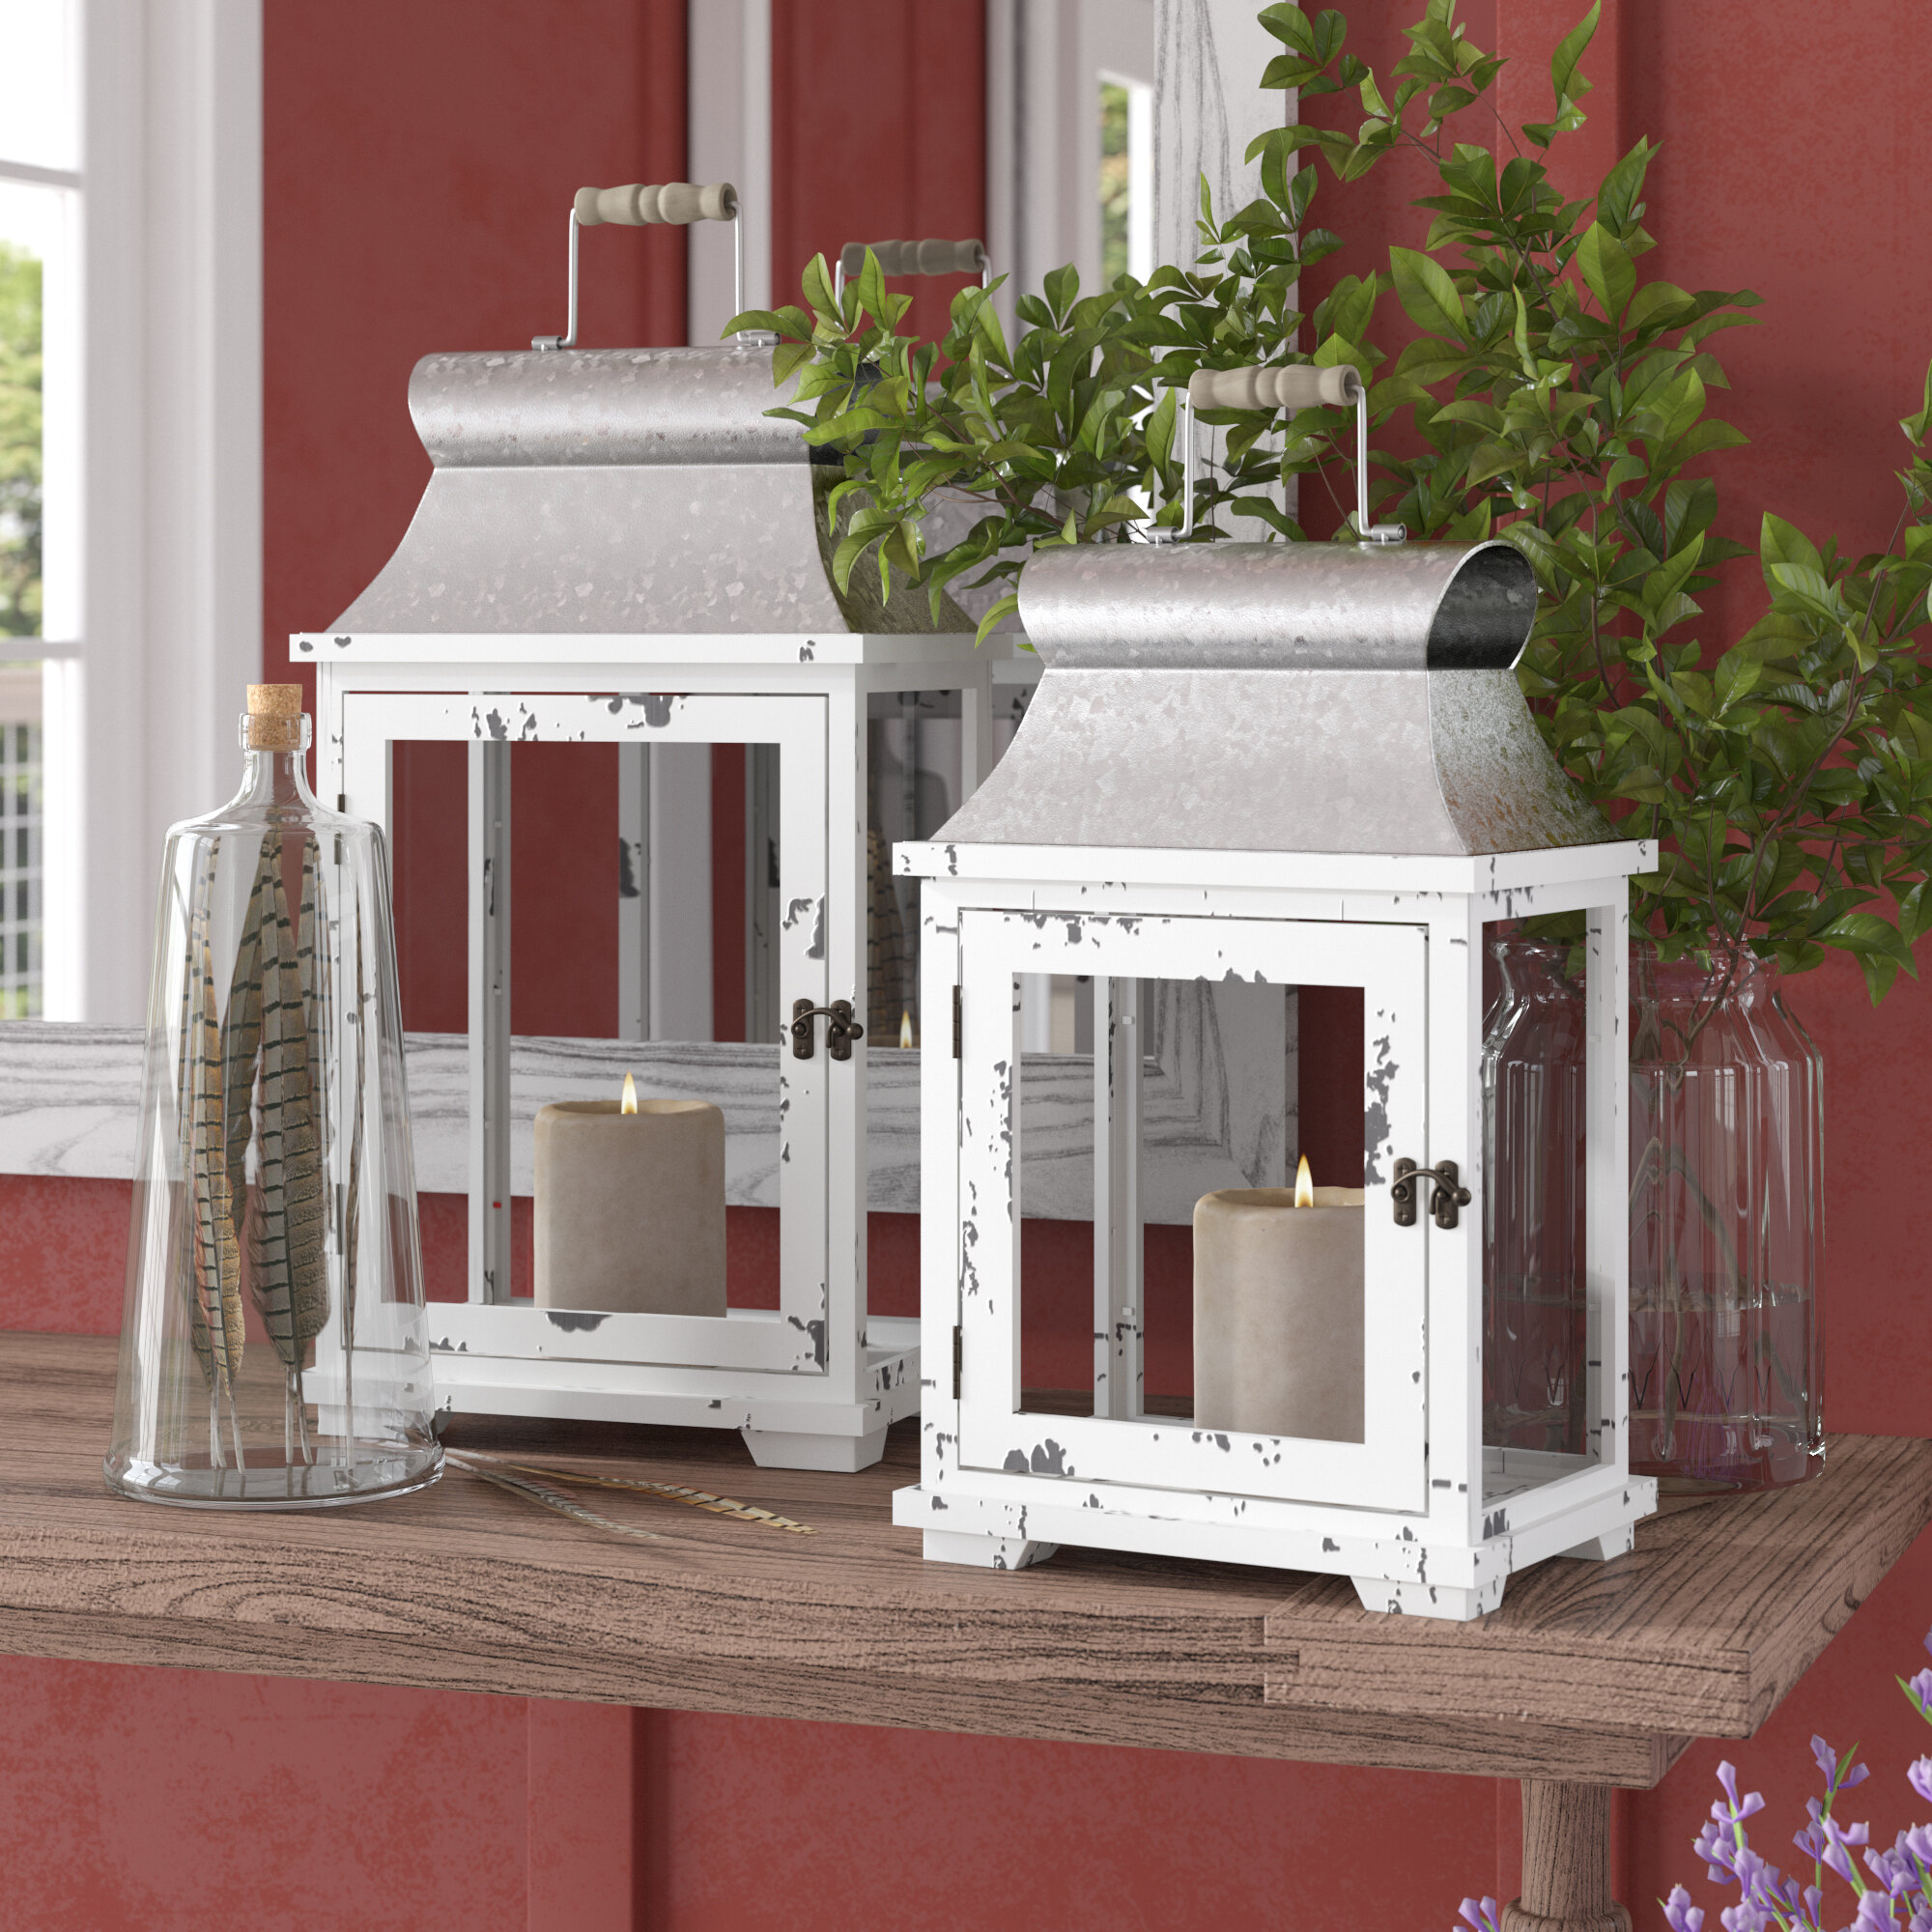 2 Tin Wood Lanterns With Ivory Resin Flameless Candles Indoor Outdoor Decor